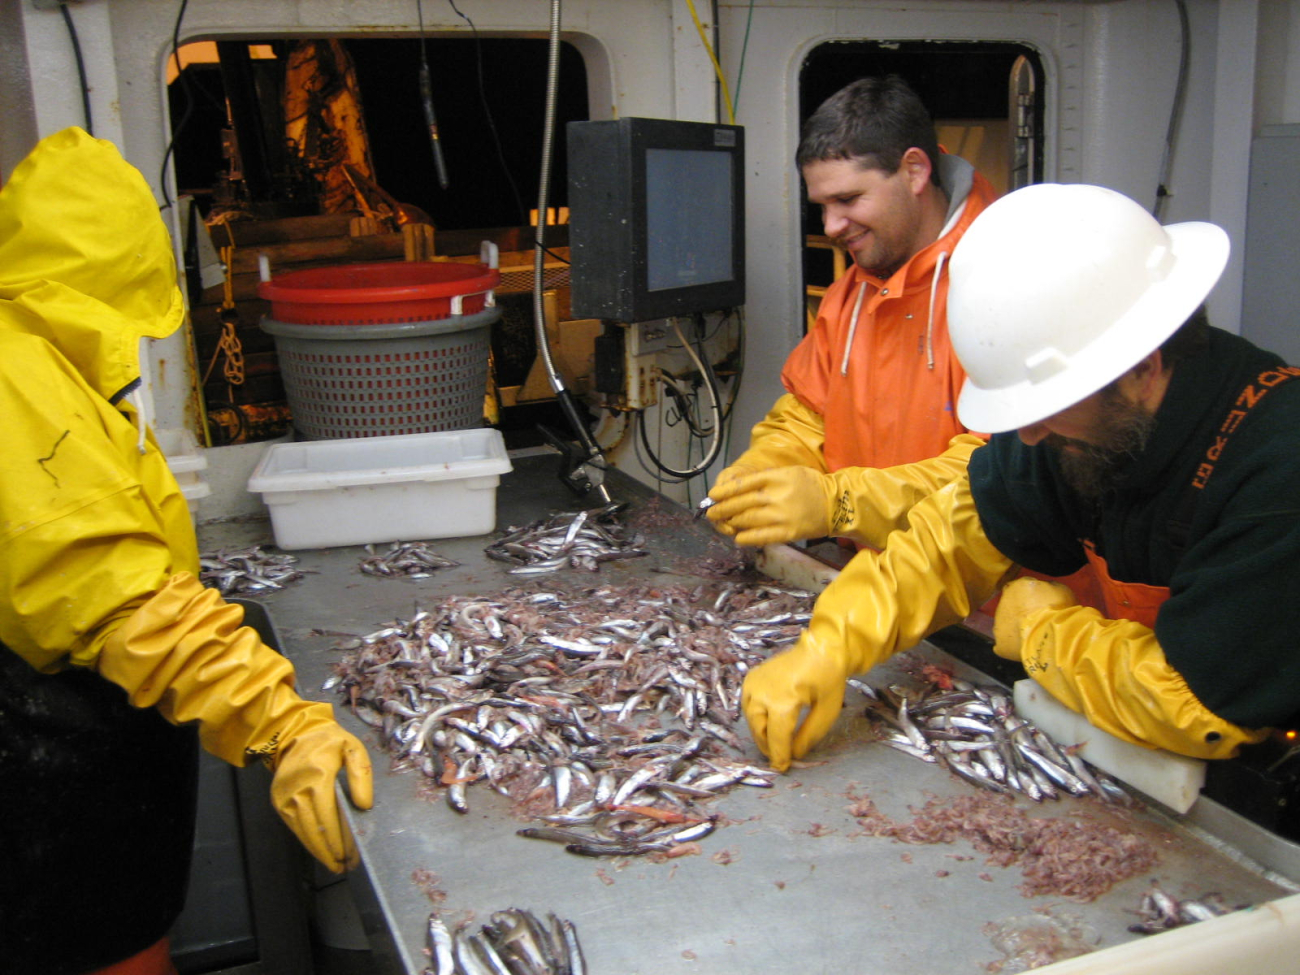 Sorting krill and small fish for study by scientific party